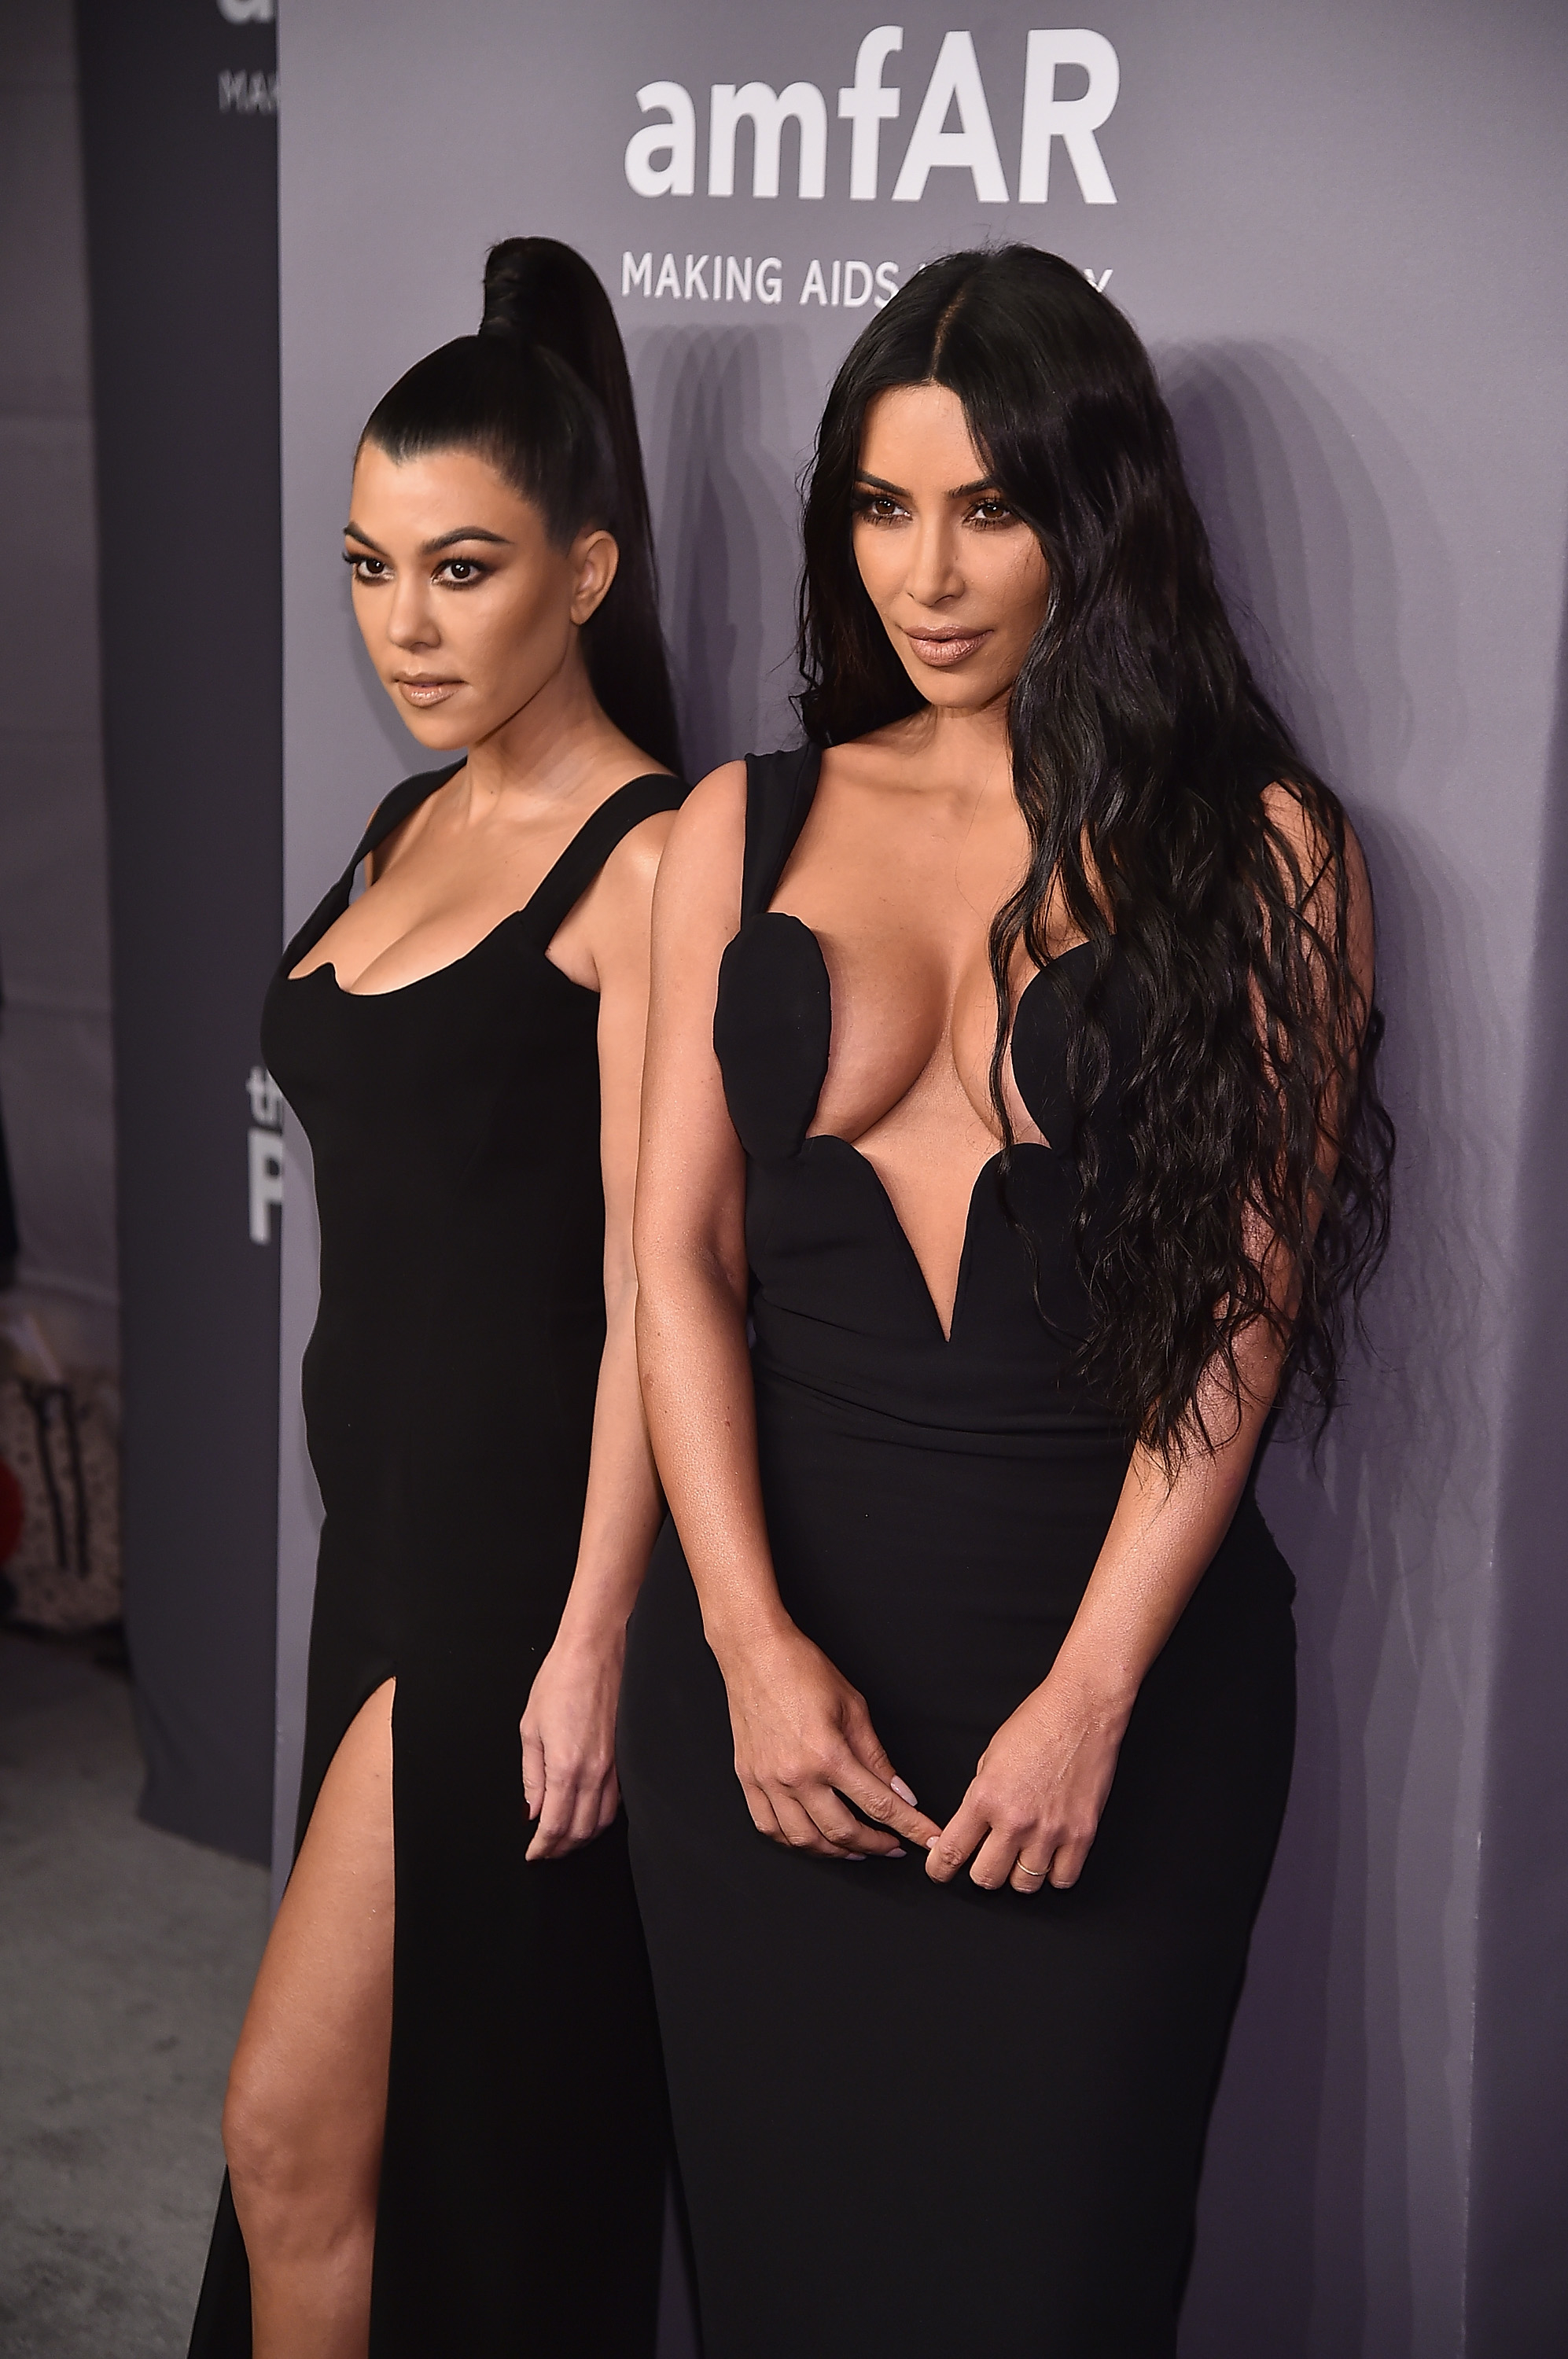 Close-up of Kim and Kourtney in formfitting sleeveless gowns at a media event